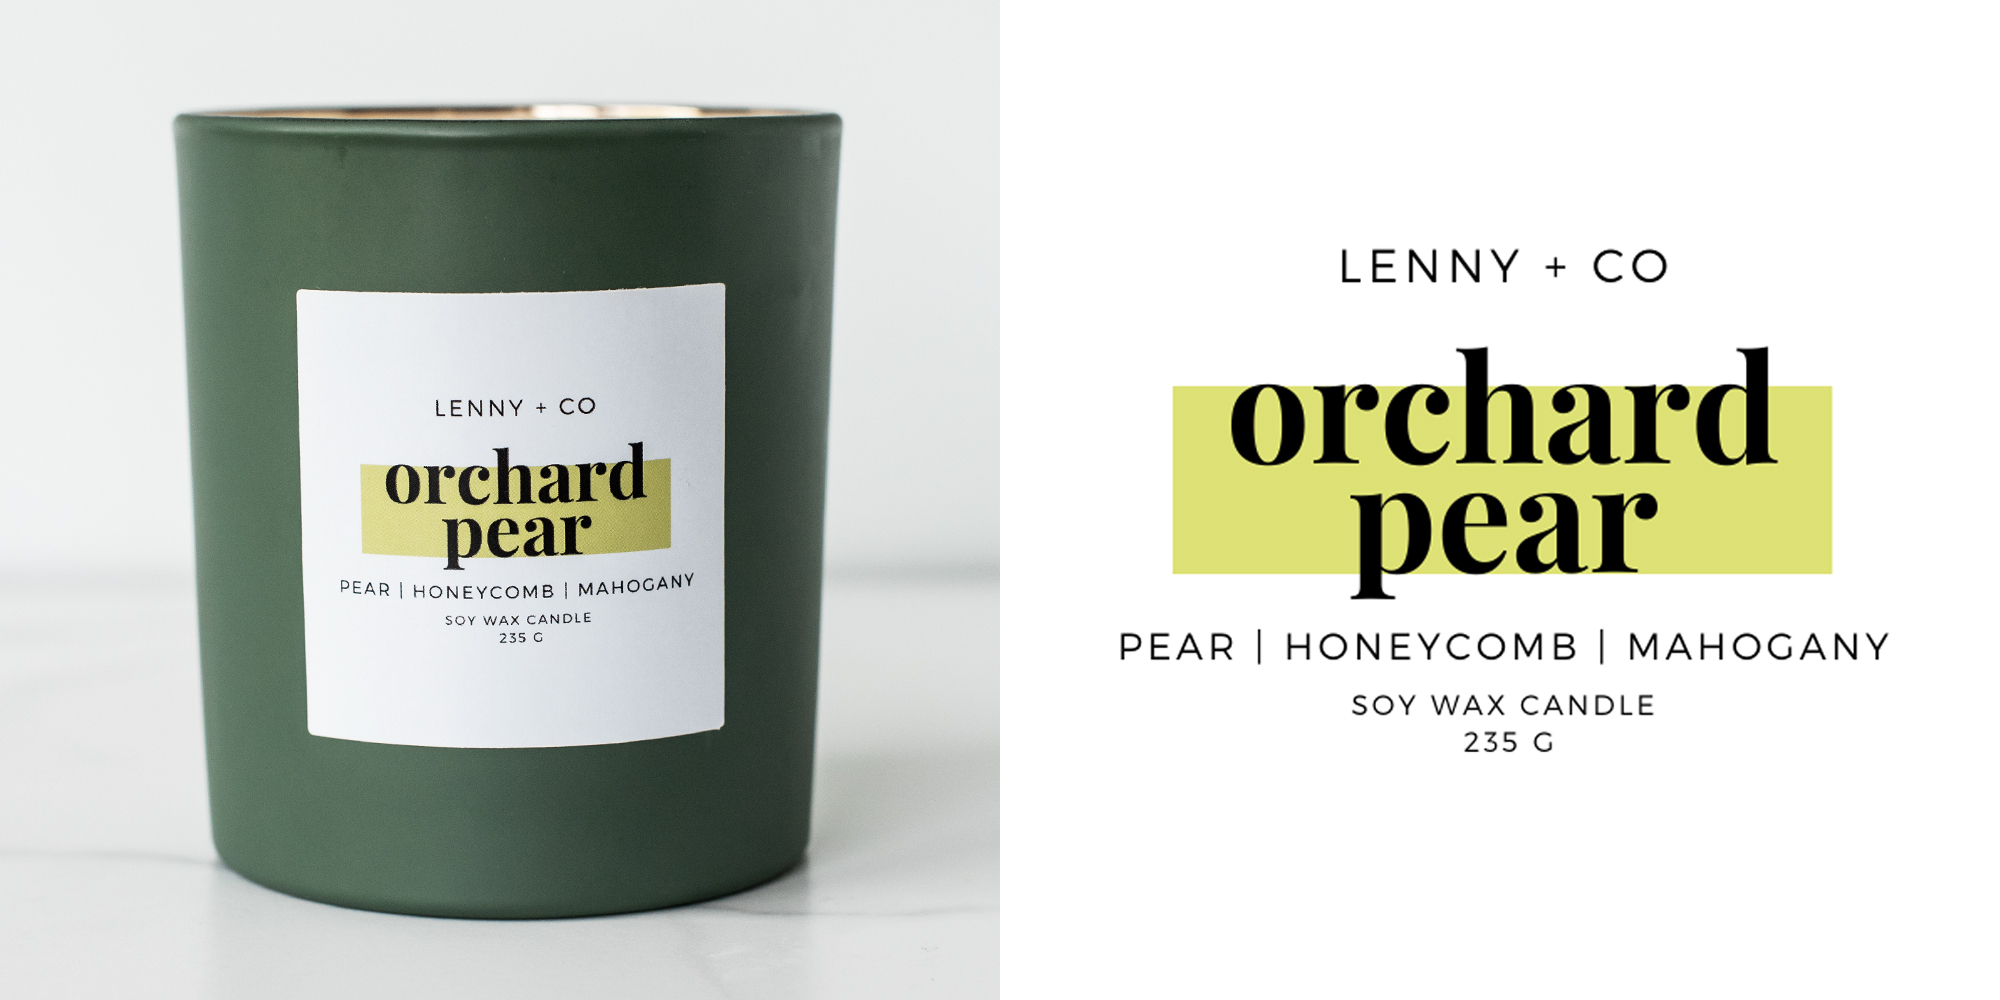 Orchard Pear fragrance oil candle and label.